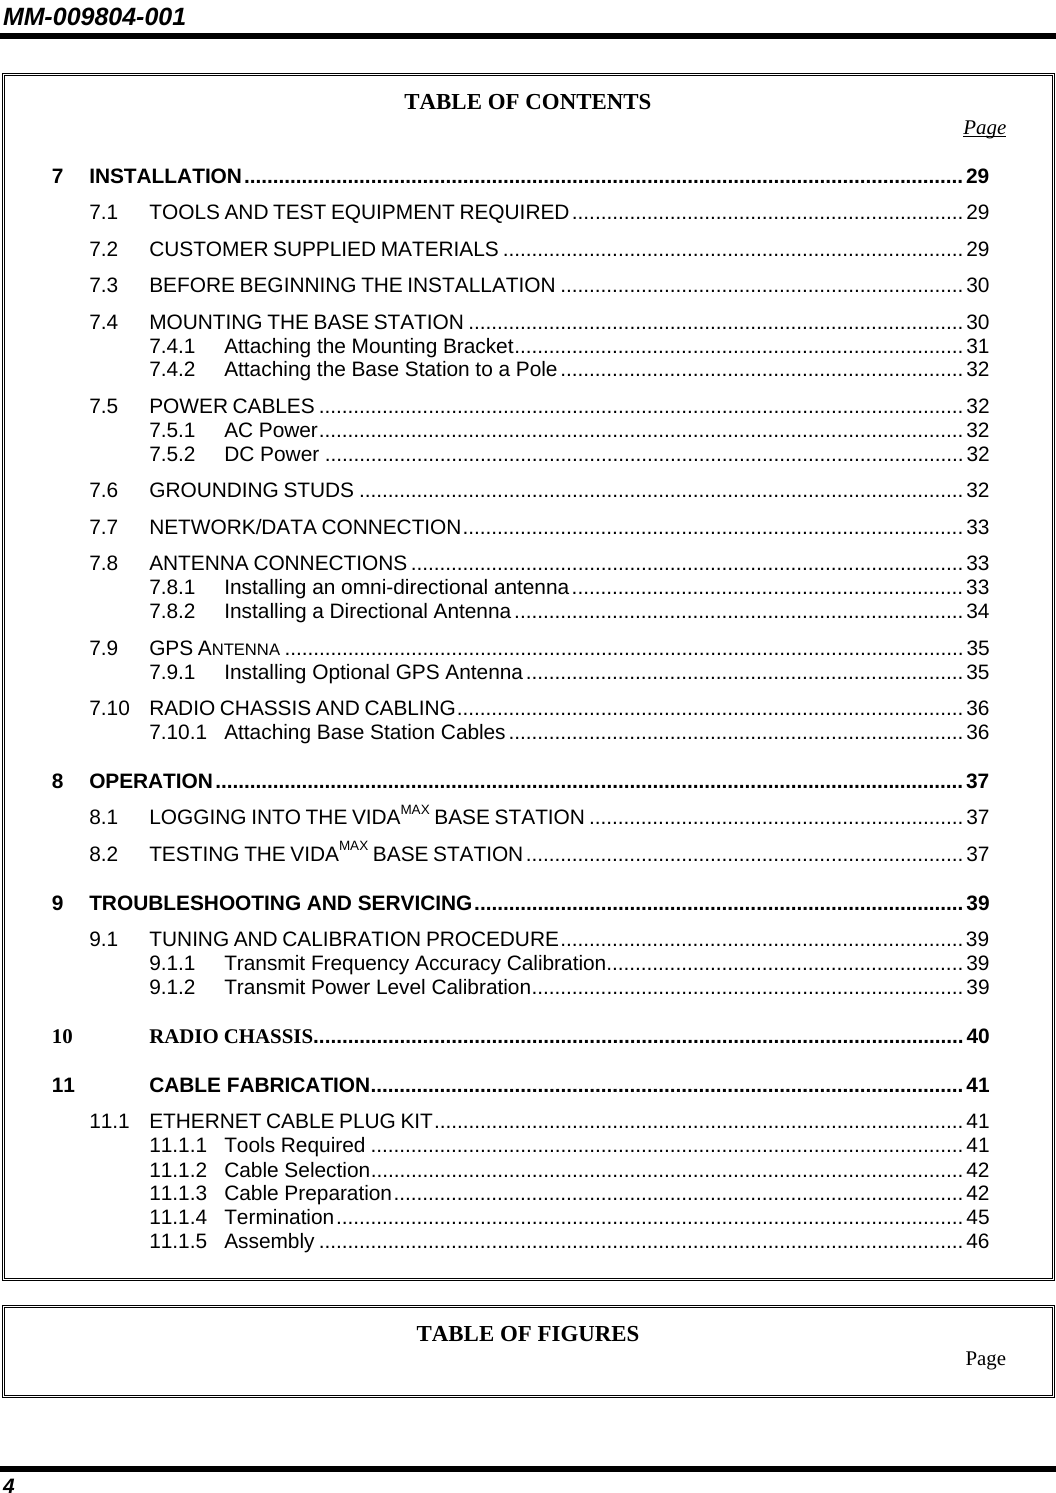 MM-009804-001 TABLE OF CONTENTS  Page7 INSTALLATION.............................................................................................................................29 7.1 TOOLS AND TEST EQUIPMENT REQUIRED....................................................................29 7.2 CUSTOMER SUPPLIED MATERIALS ................................................................................29 7.3 BEFORE BEGINNING THE INSTALLATION ......................................................................30 7.4 MOUNTING THE BASE STATION ......................................................................................30 7.4.1 Attaching the Mounting Bracket..............................................................................31 7.4.2 Attaching the Base Station to a Pole...................................................................... 32 7.5 POWER CABLES ................................................................................................................32 7.5.1 AC Power................................................................................................................ 32 7.5.2 DC Power ...............................................................................................................32 7.6 GROUNDING STUDS .........................................................................................................32 7.7 NETWORK/DATA CONNECTION....................................................................................... 33 7.8 ANTENNA CONNECTIONS ................................................................................................33 7.8.1 Installing an omni-directional antenna.................................................................... 33 7.8.2 Installing a Directional Antenna.............................................................................. 34 7.9 GPS ANTENNA ......................................................................................................................35 7.9.1 Installing Optional GPS Antenna............................................................................ 35 7.10 RADIO CHASSIS AND CABLING........................................................................................ 36 7.10.1 Attaching Base Station Cables............................................................................... 36 8 OPERATION..................................................................................................................................37 8.1 LOGGING INTO THE VIDAMAX BASE STATION .................................................................37 8.2 TESTING THE VIDAMAX BASE STATION............................................................................37 9 TROUBLESHOOTING AND SERVICING.....................................................................................39 9.1 TUNING AND CALIBRATION PROCEDURE...................................................................... 39 9.1.1 Transmit Frequency Accuracy Calibration.............................................................. 39 9.1.2 Transmit Power Level Calibration...........................................................................39 10 RADIO CHASSIS.................................................................................................................40 11 CABLE FABRICATION.......................................................................................................41 11.1 ETHERNET CABLE PLUG KIT............................................................................................ 41 11.1.1 Tools Required .......................................................................................................41 11.1.2 Cable Selection.......................................................................................................42 11.1.3 Cable Preparation...................................................................................................42 11.1.4 Termination............................................................................................................. 45 11.1.5 Assembly ................................................................................................................46   TABLE OF FIGURES  Page  4 